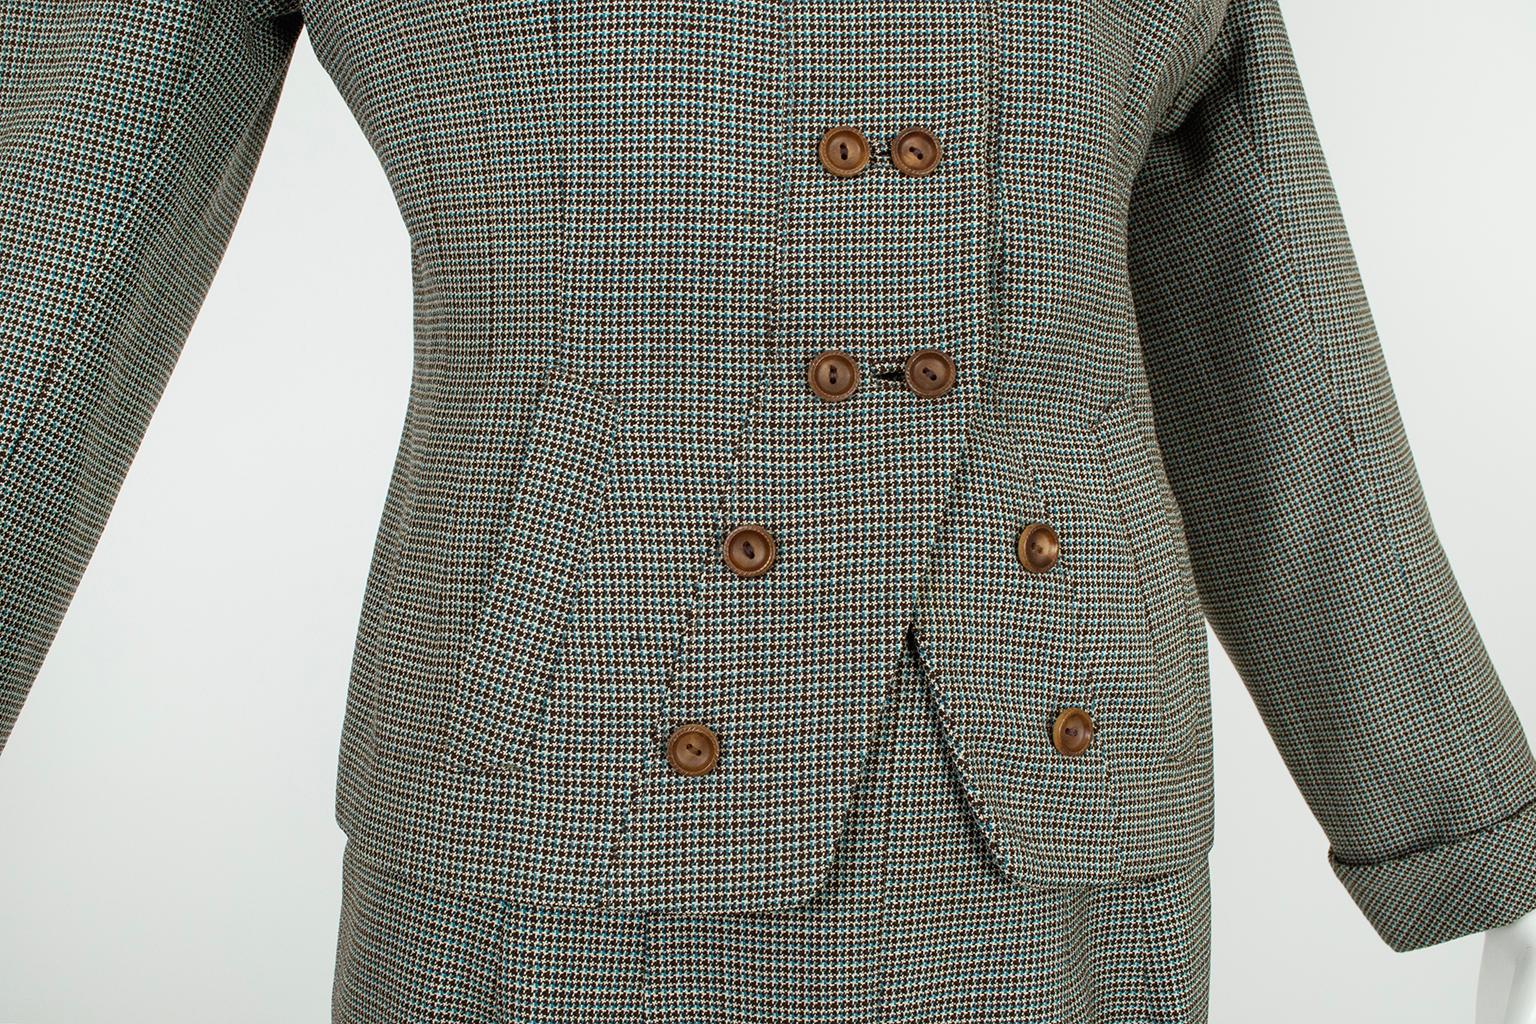 French Blue and Brown Houndstooth Cutaway Suit with Novelty Buttons – S-M, 1940s For Sale 1